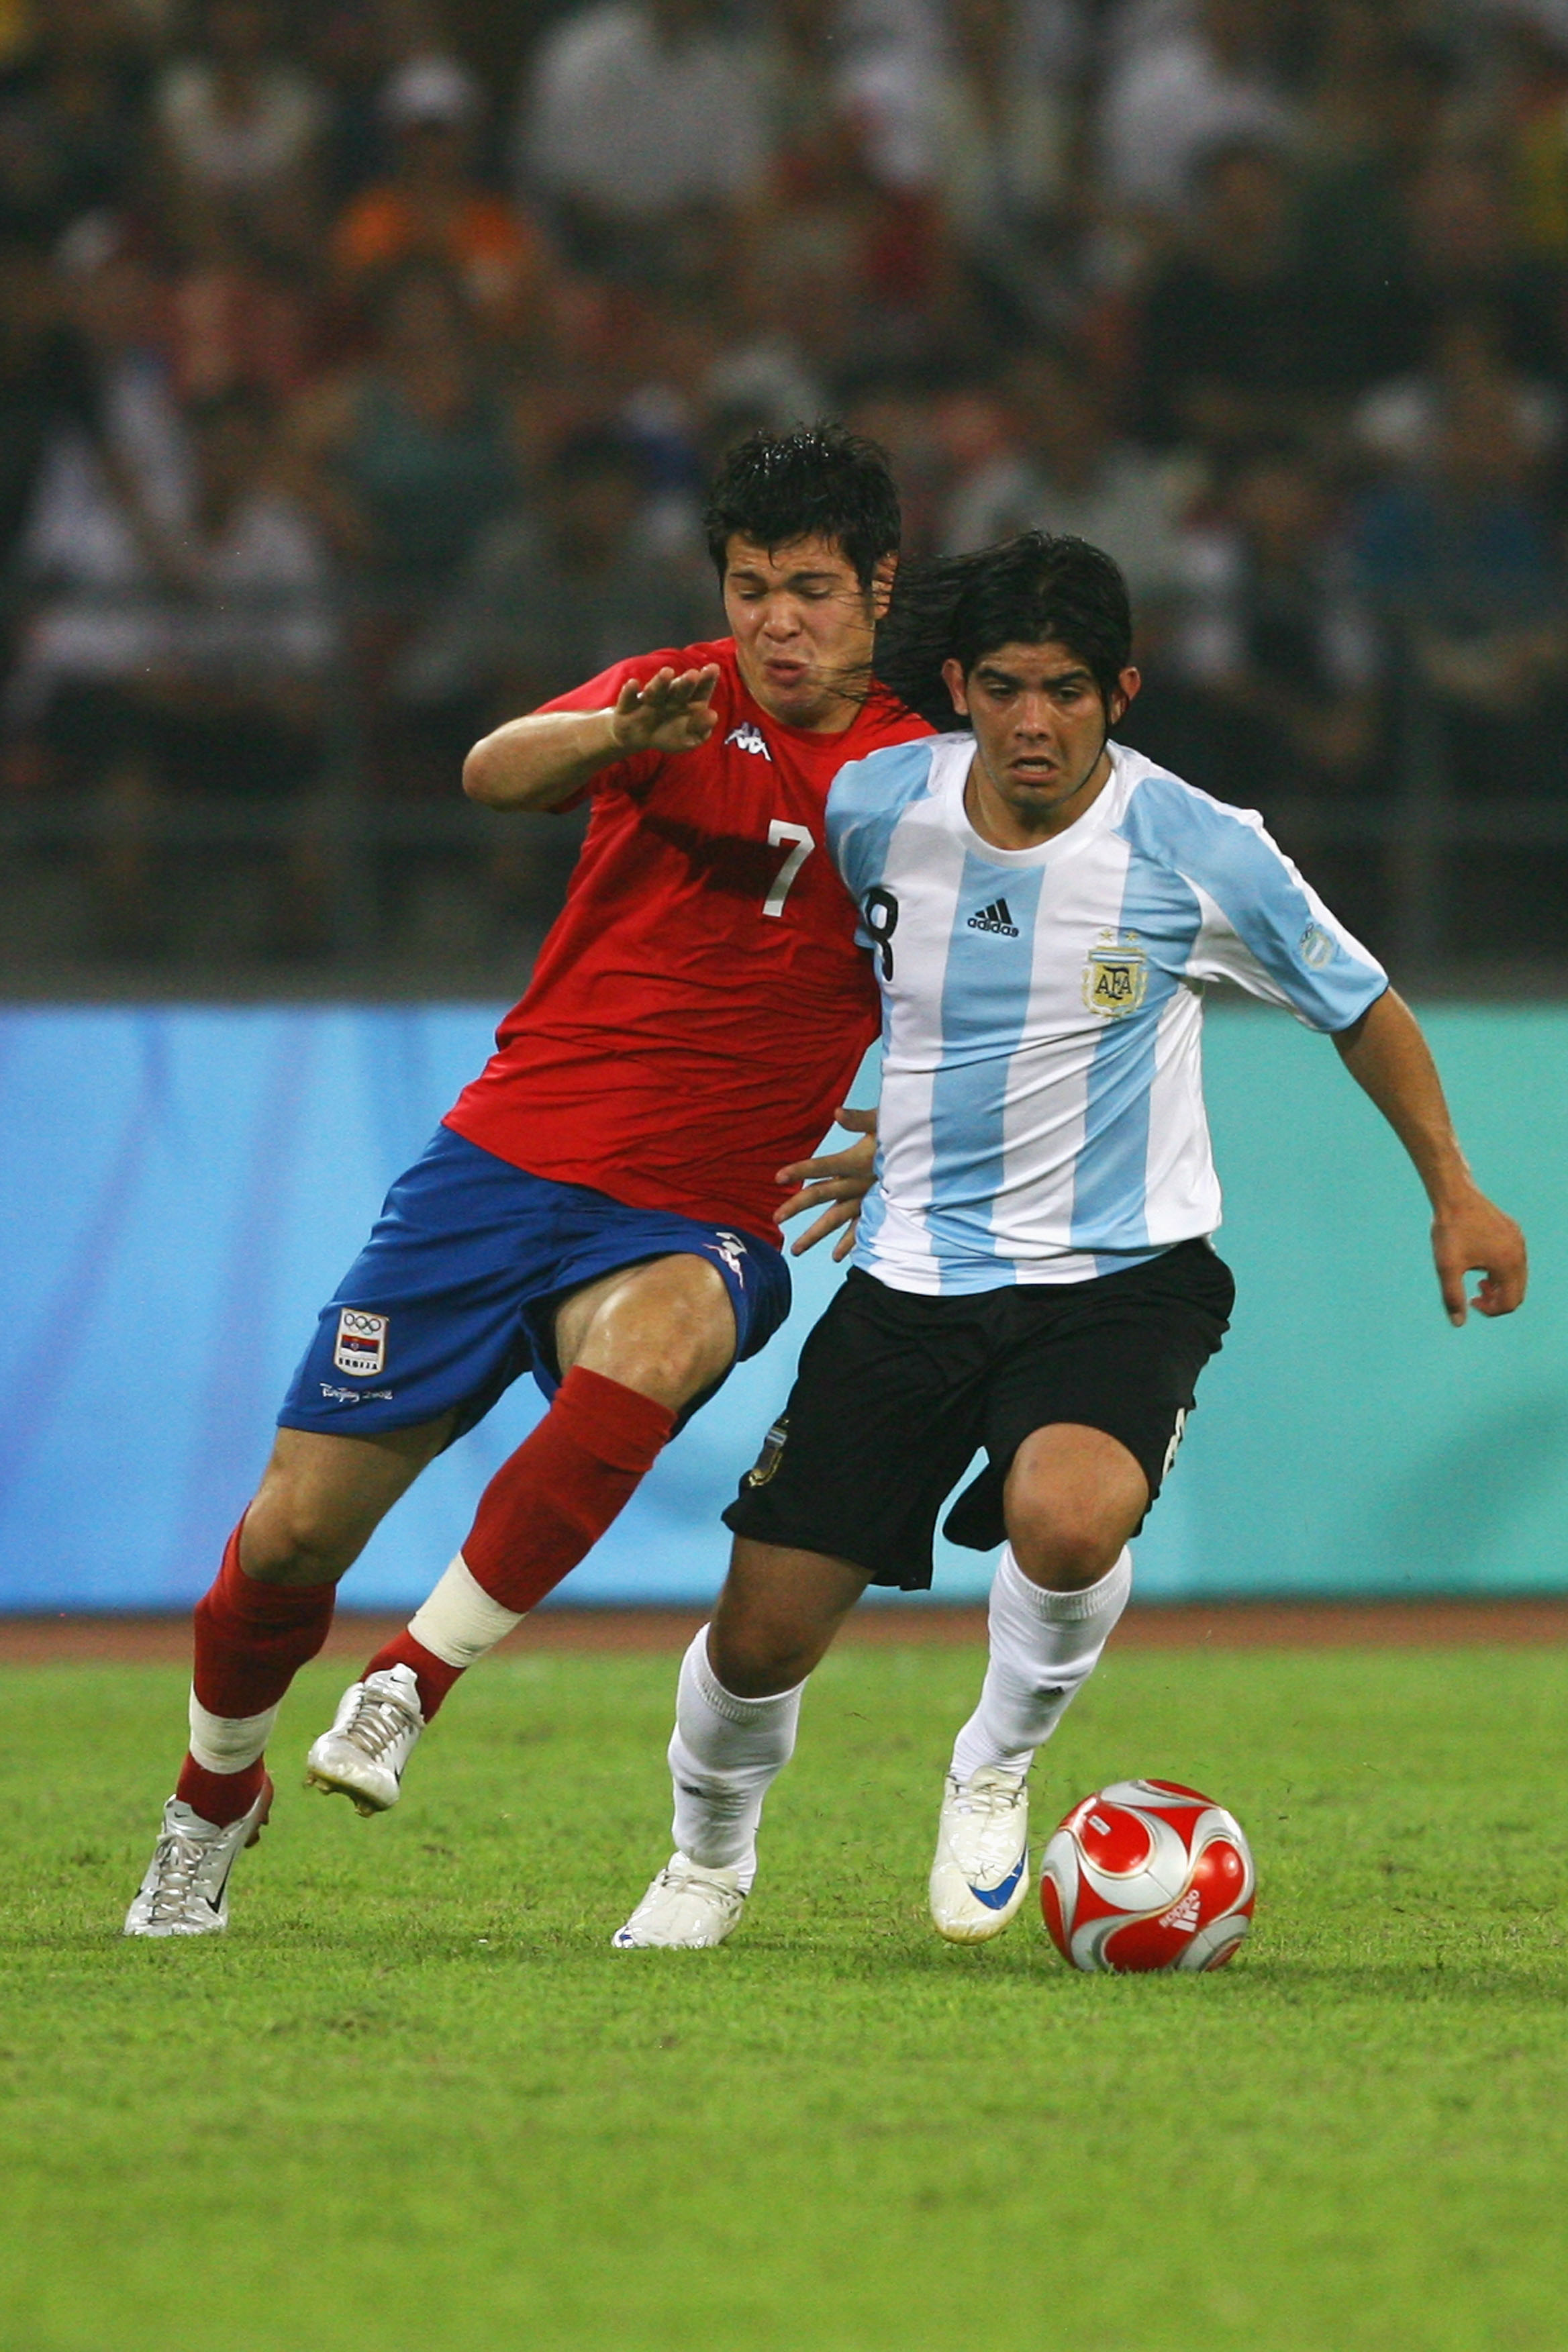 BEIJING - AUGUST 13:  Ever Banega of Argentina is tackled by Milan Smiljanic #7 of Serbia during the Men's First Round Group A match between Argentina and Serbia at the Workers' Stadium on Day 5 of the Beijing 2008 Olympic Games on August 13, 2008 in Beij